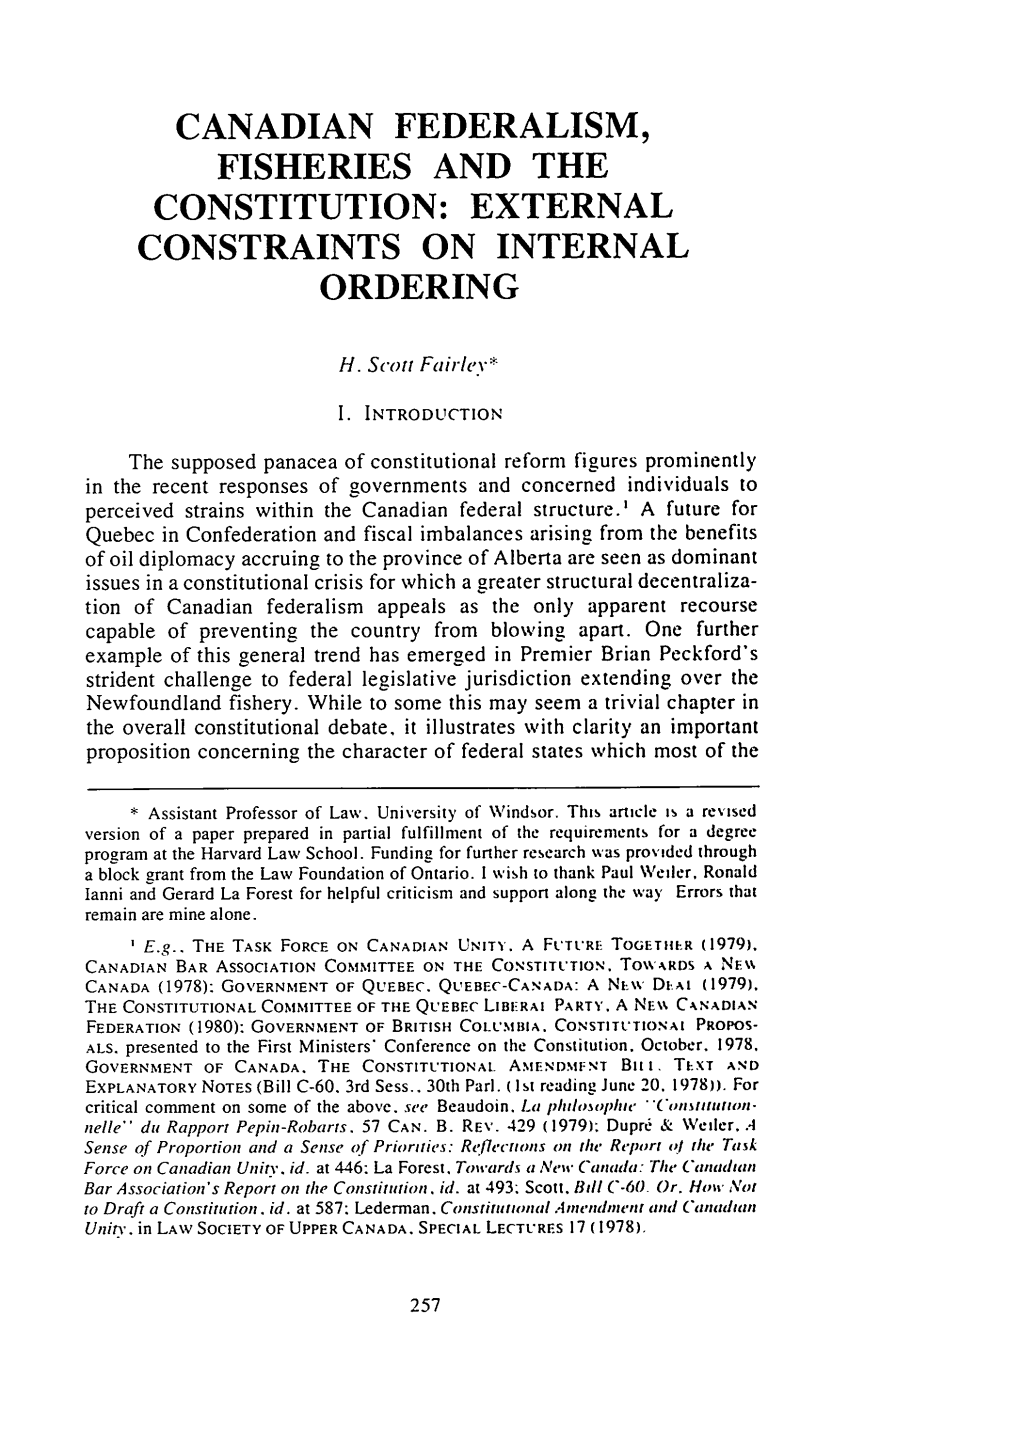 Canadian Federalism, Fisheries and the Constitution: External Constraints on Internal Ordering